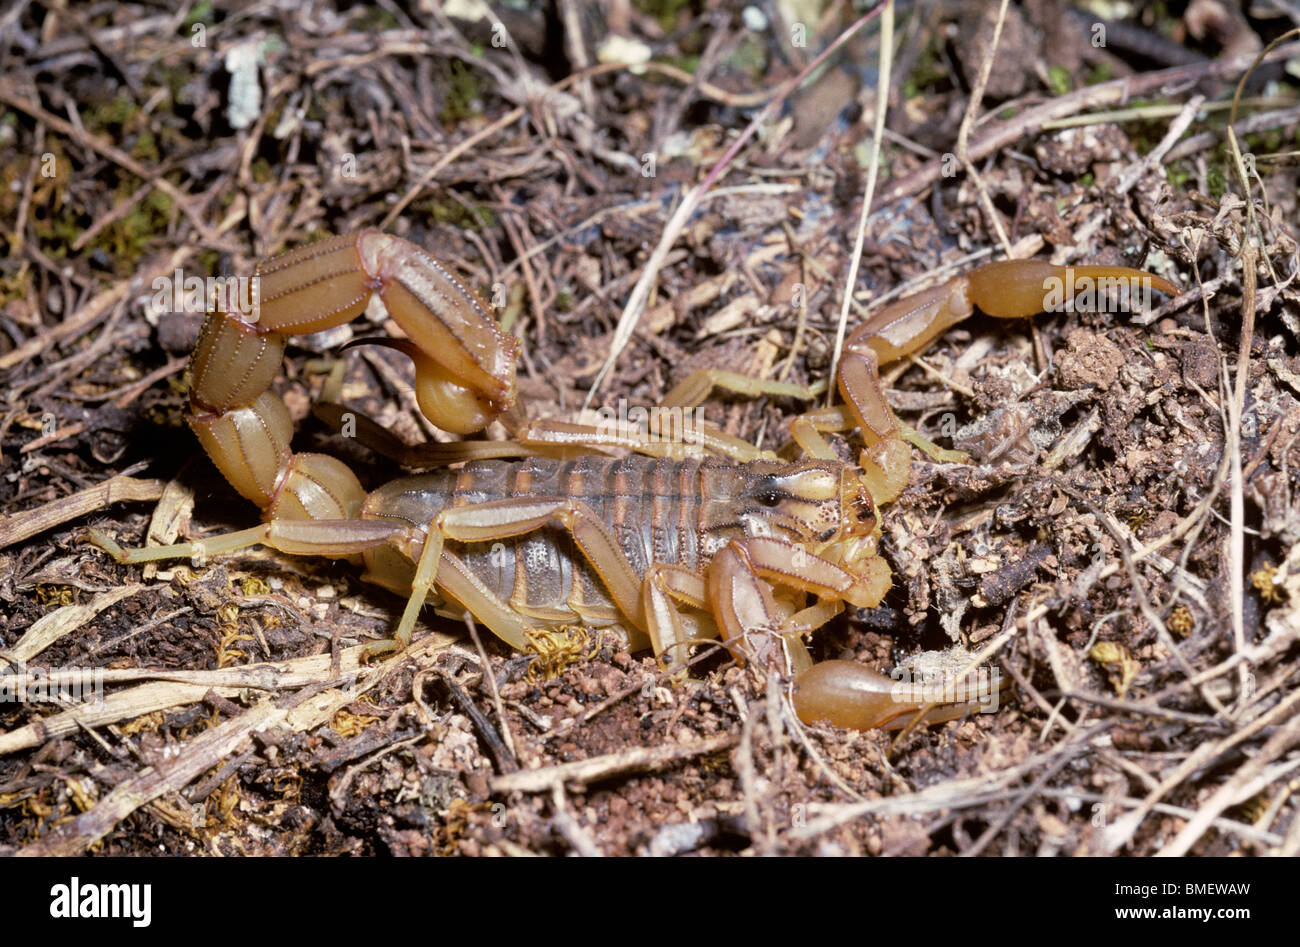 Scorpion (Buthus occitanus: Buthidae), with an unpleasant sting, which normally spends daylight hours under stones, Spain Stock Photo